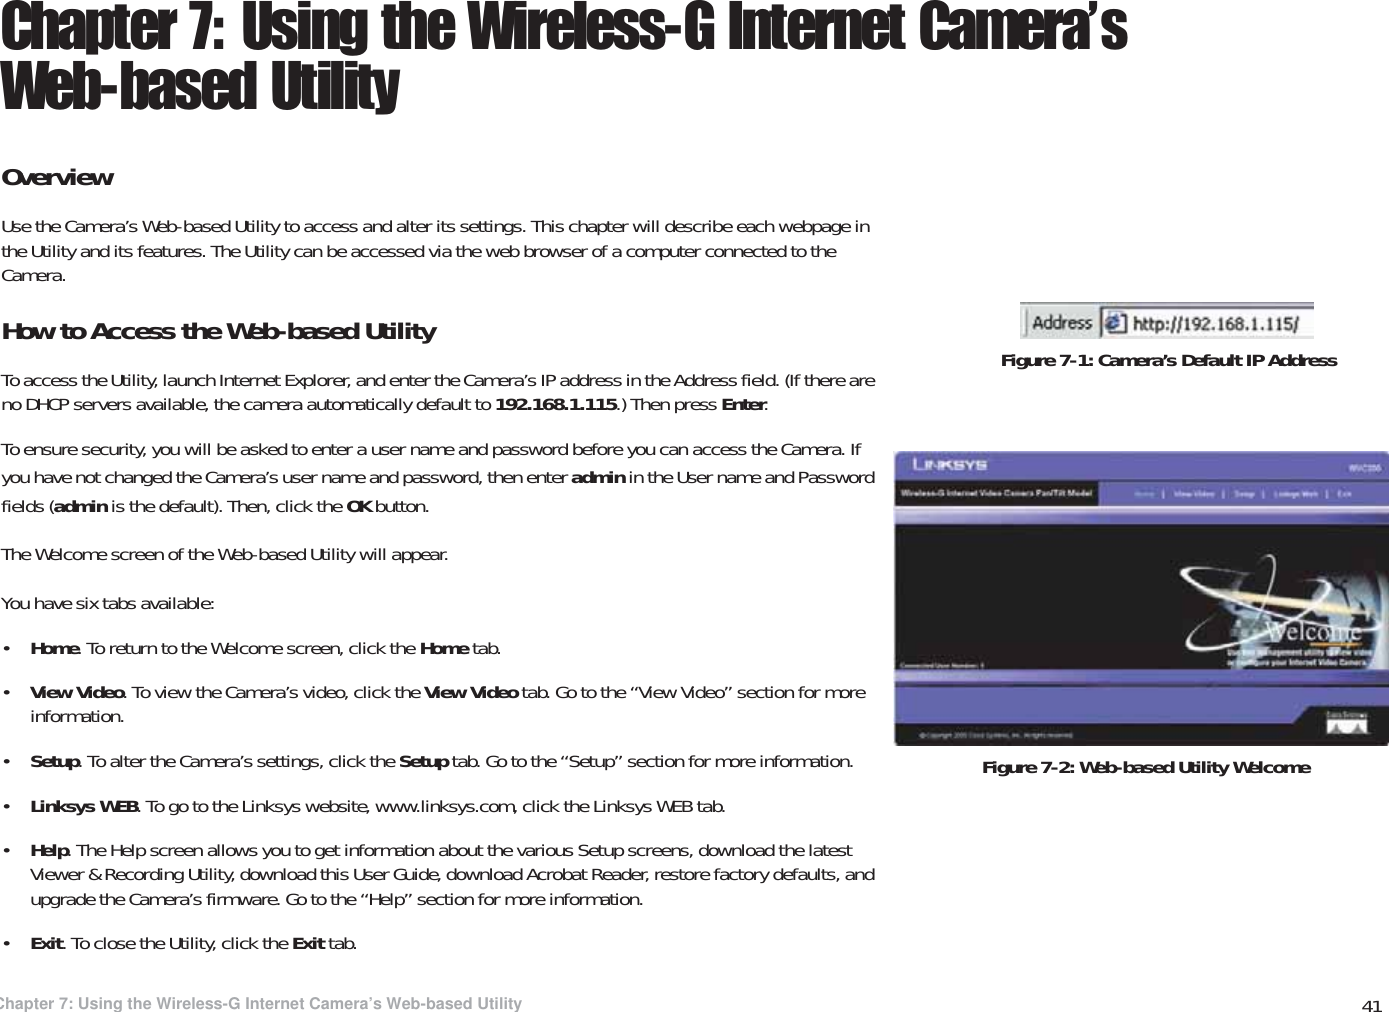 41Chapter 7: Using the Wireless-G Internet Camera’s Web-based UtilityOverviewWireless-G PTZ Internet Video Camera with AudioChapter 7: Using the Wireless-G Internet Camera’s Web-based UtilityOverviewUse the Camera’s Web-based Utility to access and alter its settings. This chapter will describe each webpage in the Utility and its features. The Utility can be accessed via the web browser of a computer connected to the Camera.How to Access the Web-based UtilityTo access the Utility, launch Internet Explorer, and enter the Camera’s IP address in the Address field. (If there are no DHCP servers available, the camera automatically default to 192.168.1.115.) Then press Enter.To ensure security, you will be asked to enter a user name and password before you can access the Camera. If you have not changed the Camera’s user name and password, then enter admin in the User name and Password fields (admin is the default). Then, click the OK button.The Welcome screen of the Web-based Utility will appear.You have six tabs available:•Home. To return to the Welcome screen, click the Home tab.•View Video. To view the Camera’s video, click the View Video tab. Go to the “View Video” section for more information.•Setup. To alter the Camera’s settings, click the Setup tab. Go to the “Setup” section for more information.•Linksys WEB. To go to the Linksys website, www.linksys.com, click the Linksys WEB tab.•Help. The Help screen allows you to get information about the various Setup screens, download the latest Viewer &amp; Recording Utility, download this User Guide, download Acrobat Reader, restore factory defaults, and upgrade the Camera’s firmware. Go to the “Help” section for more information.•Exit. To close the Utility, click the Exit tab.Figure 7-2: Web-based Utility WelcomeFigure 7-1: Camera’s Default IP Address